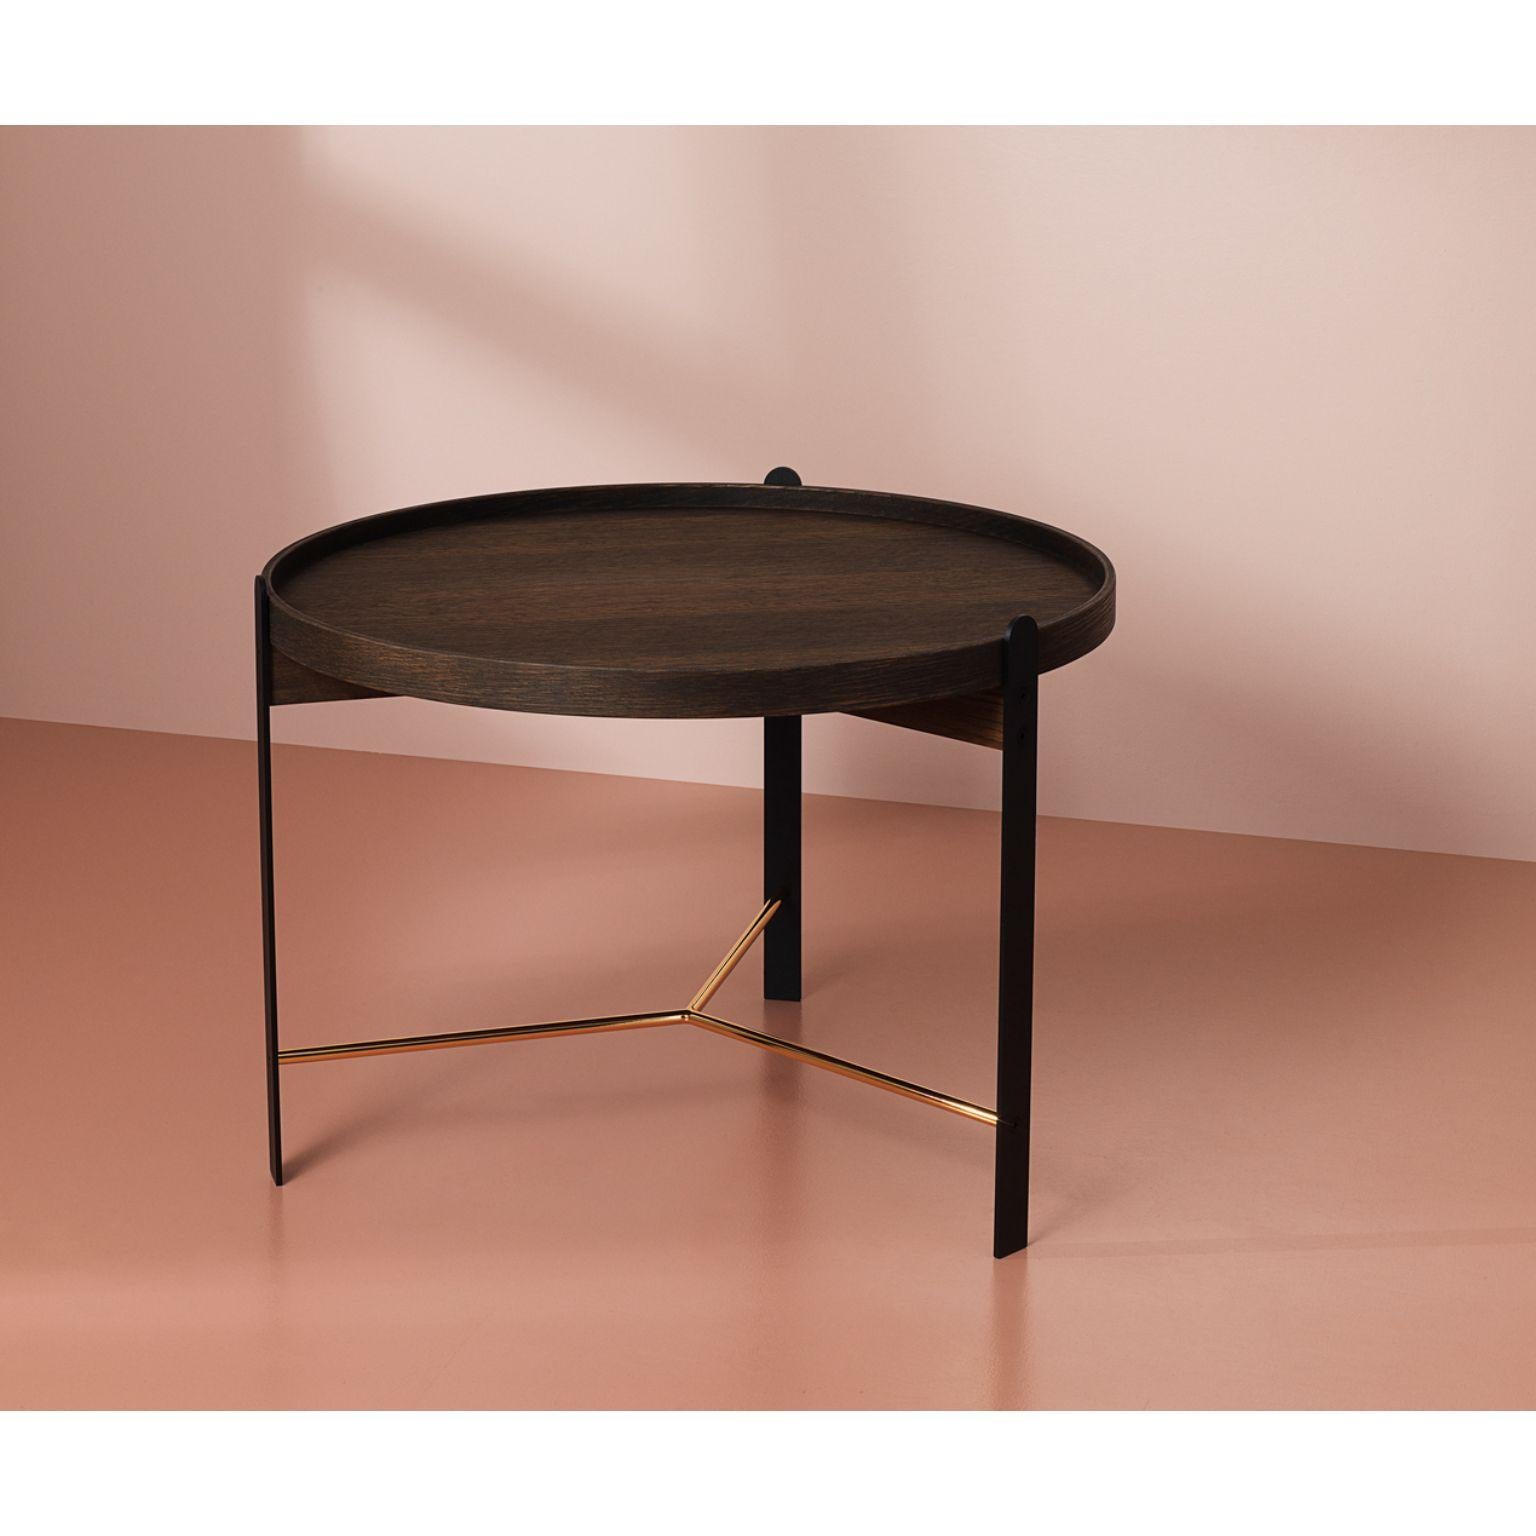 Post-Modern Compose Coffee Table Smoked Oak Brass Black by Warm Nordic